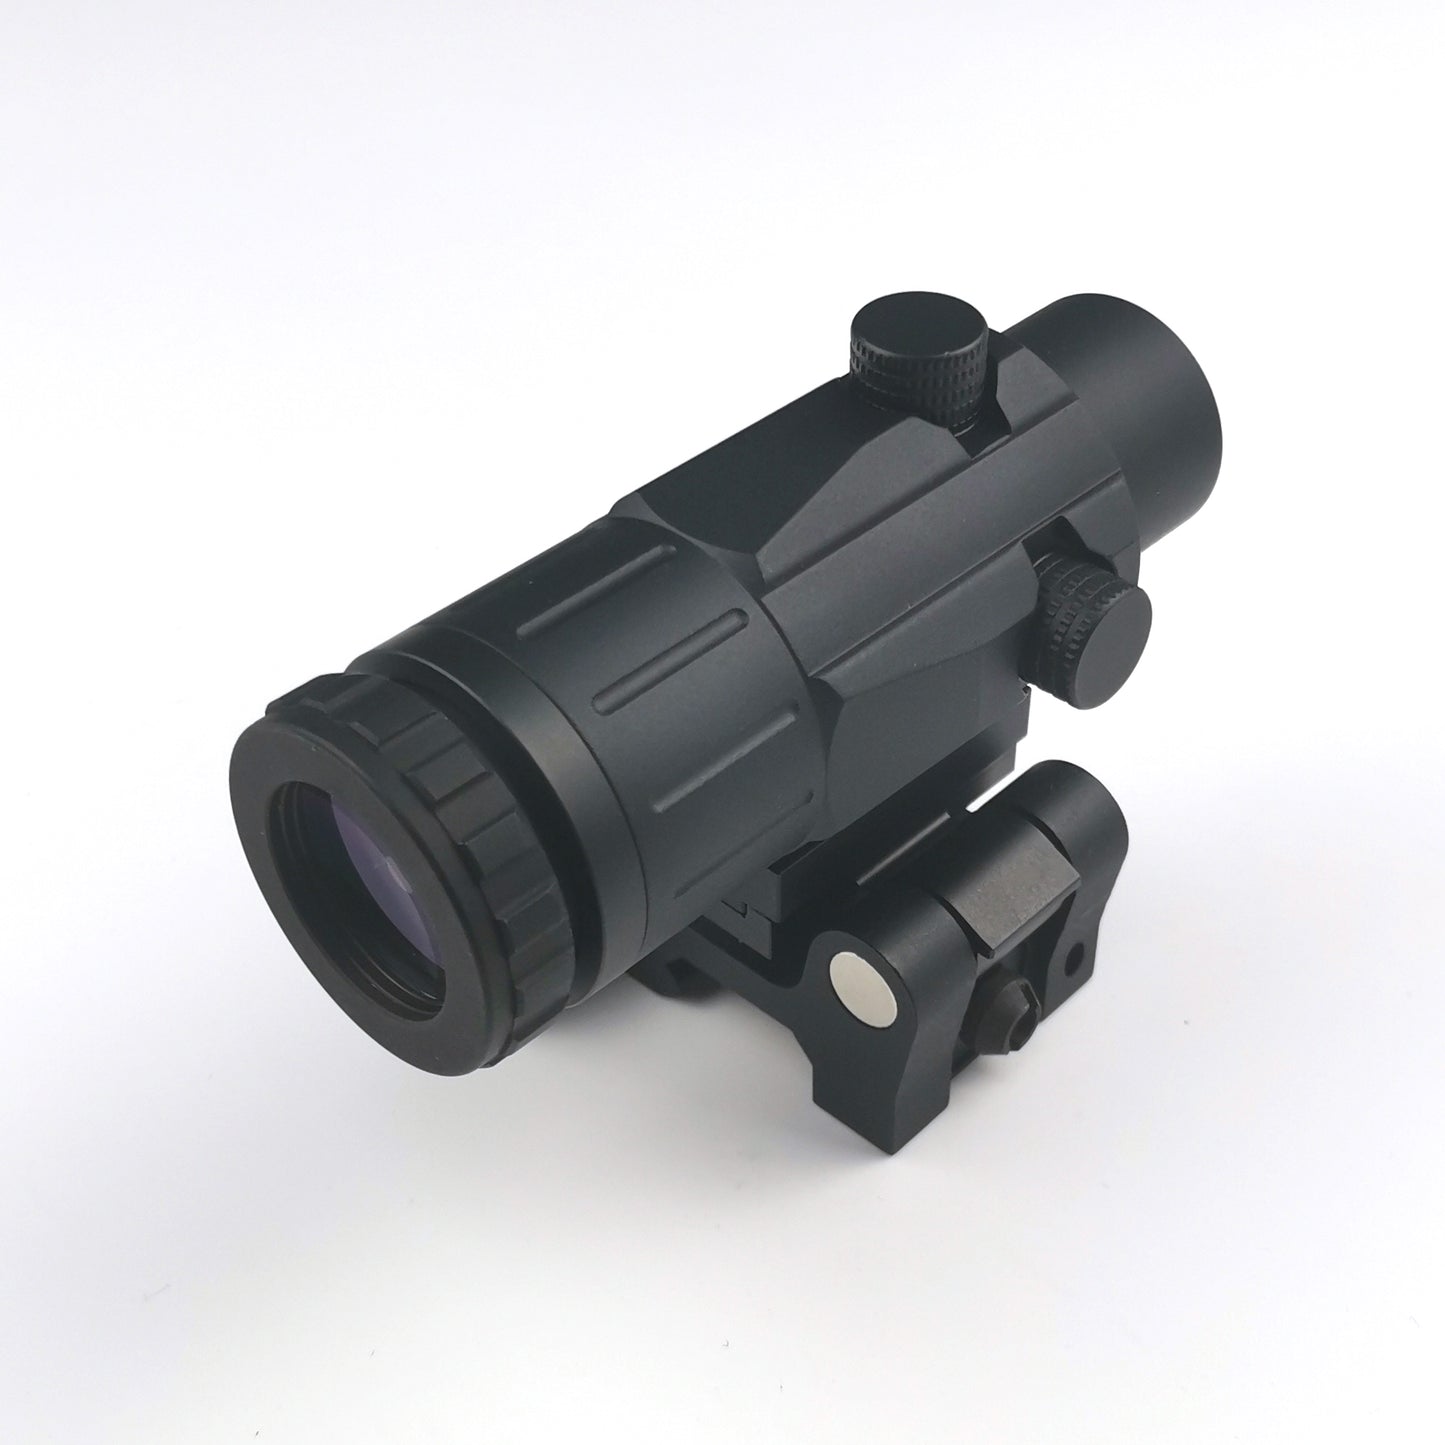 Tactic Micro Red Dot Sight Scope 3x21 Power Magnifier With Quick Disconnect